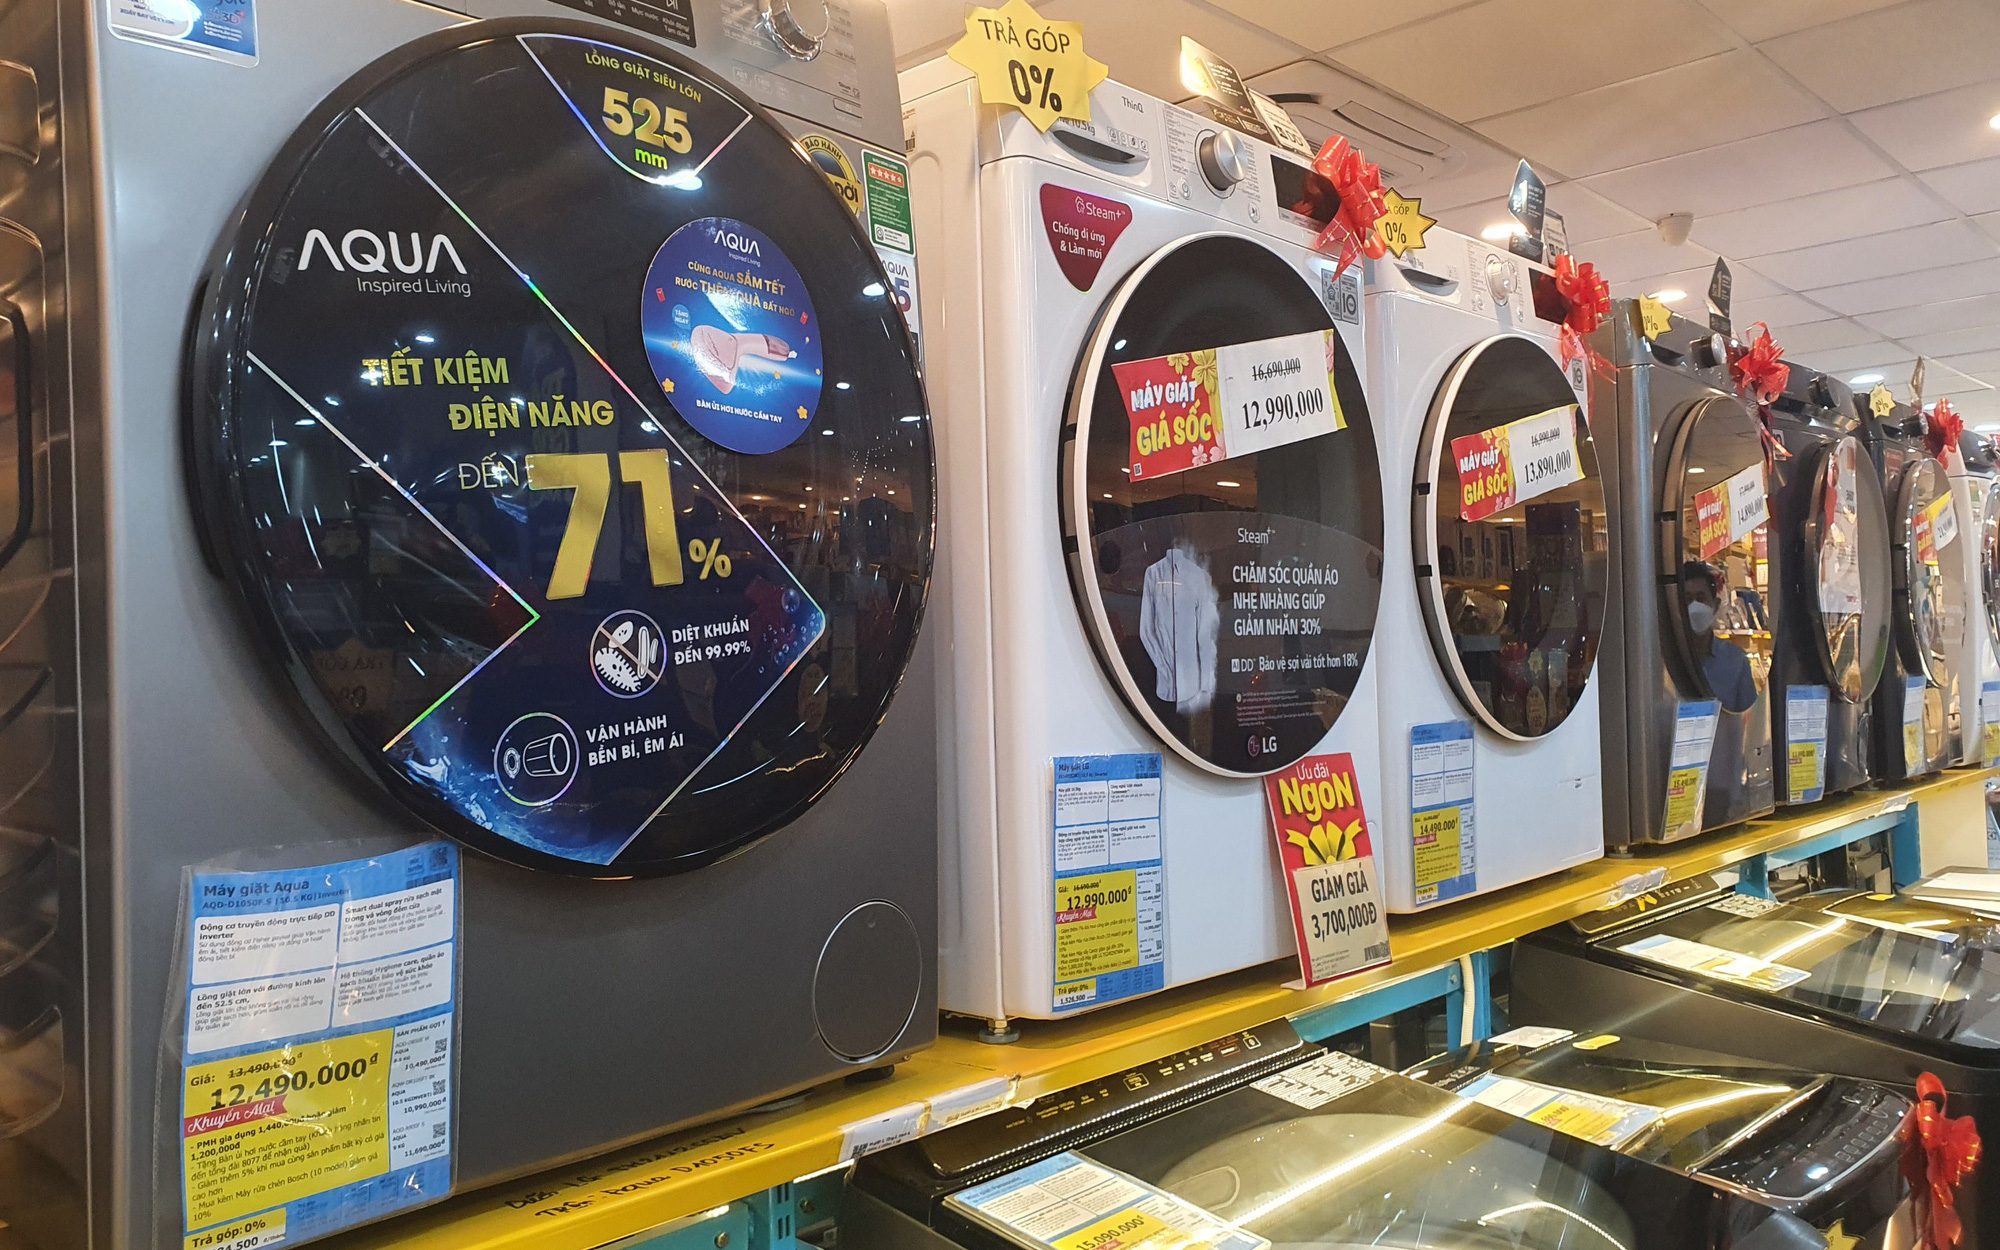 Washing machines at the same time deeply discounted up to 50%, some models are only about 2 million